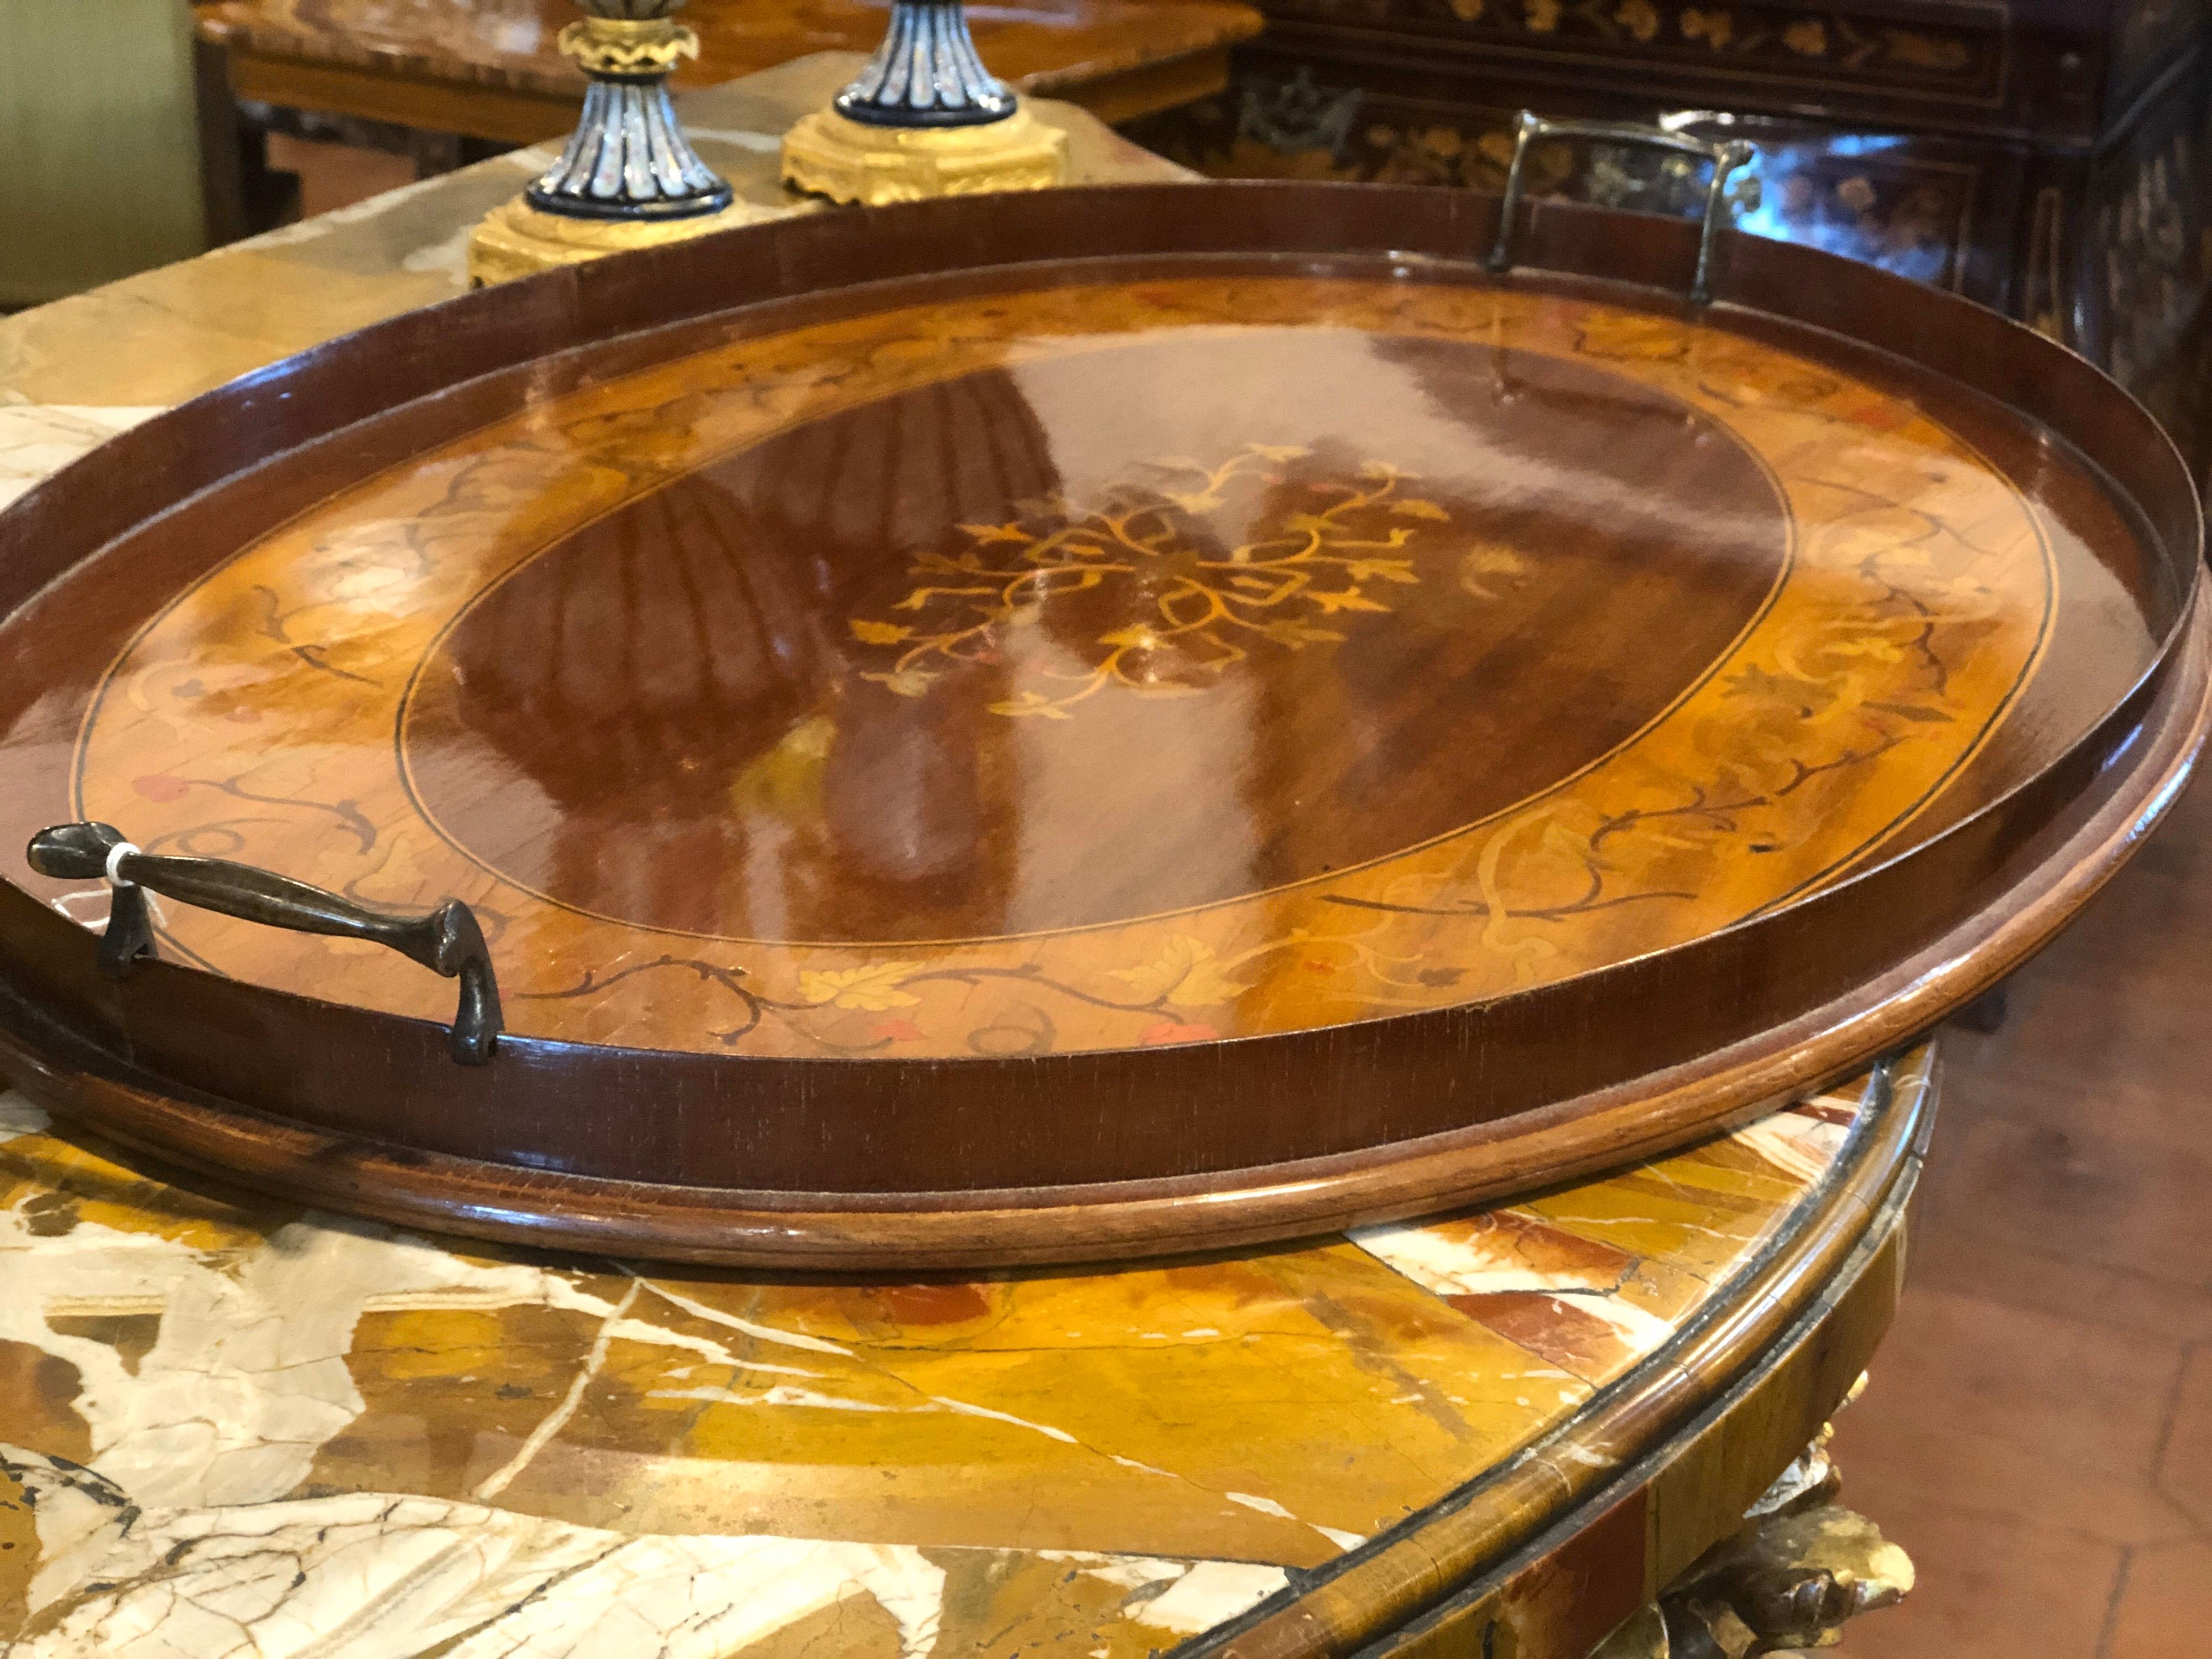 England Georgian oval tray tables, early 19th century, in mahogany and satinwood, inlaid in fruitwood to floral motifs. In excellent state of conservation, it's time to coffee or tea, come on!